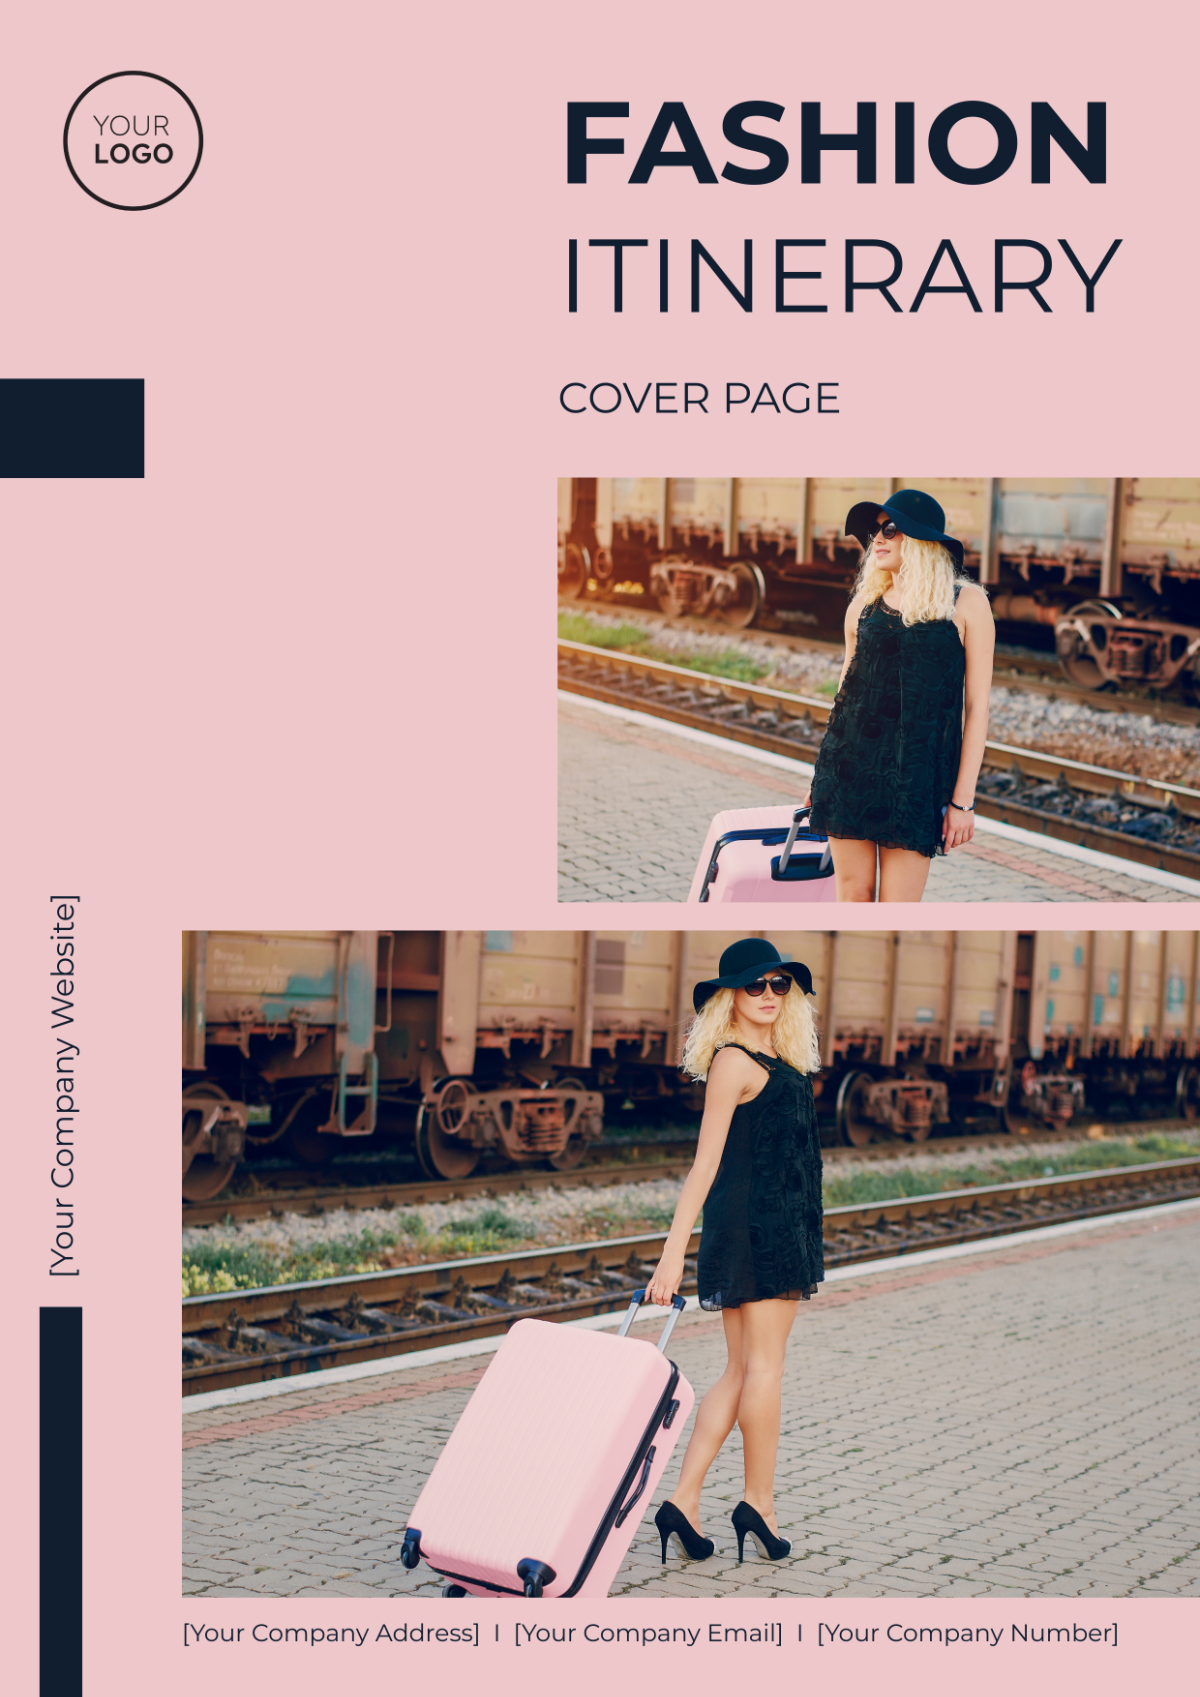 Fashion Itinerary Cover Page